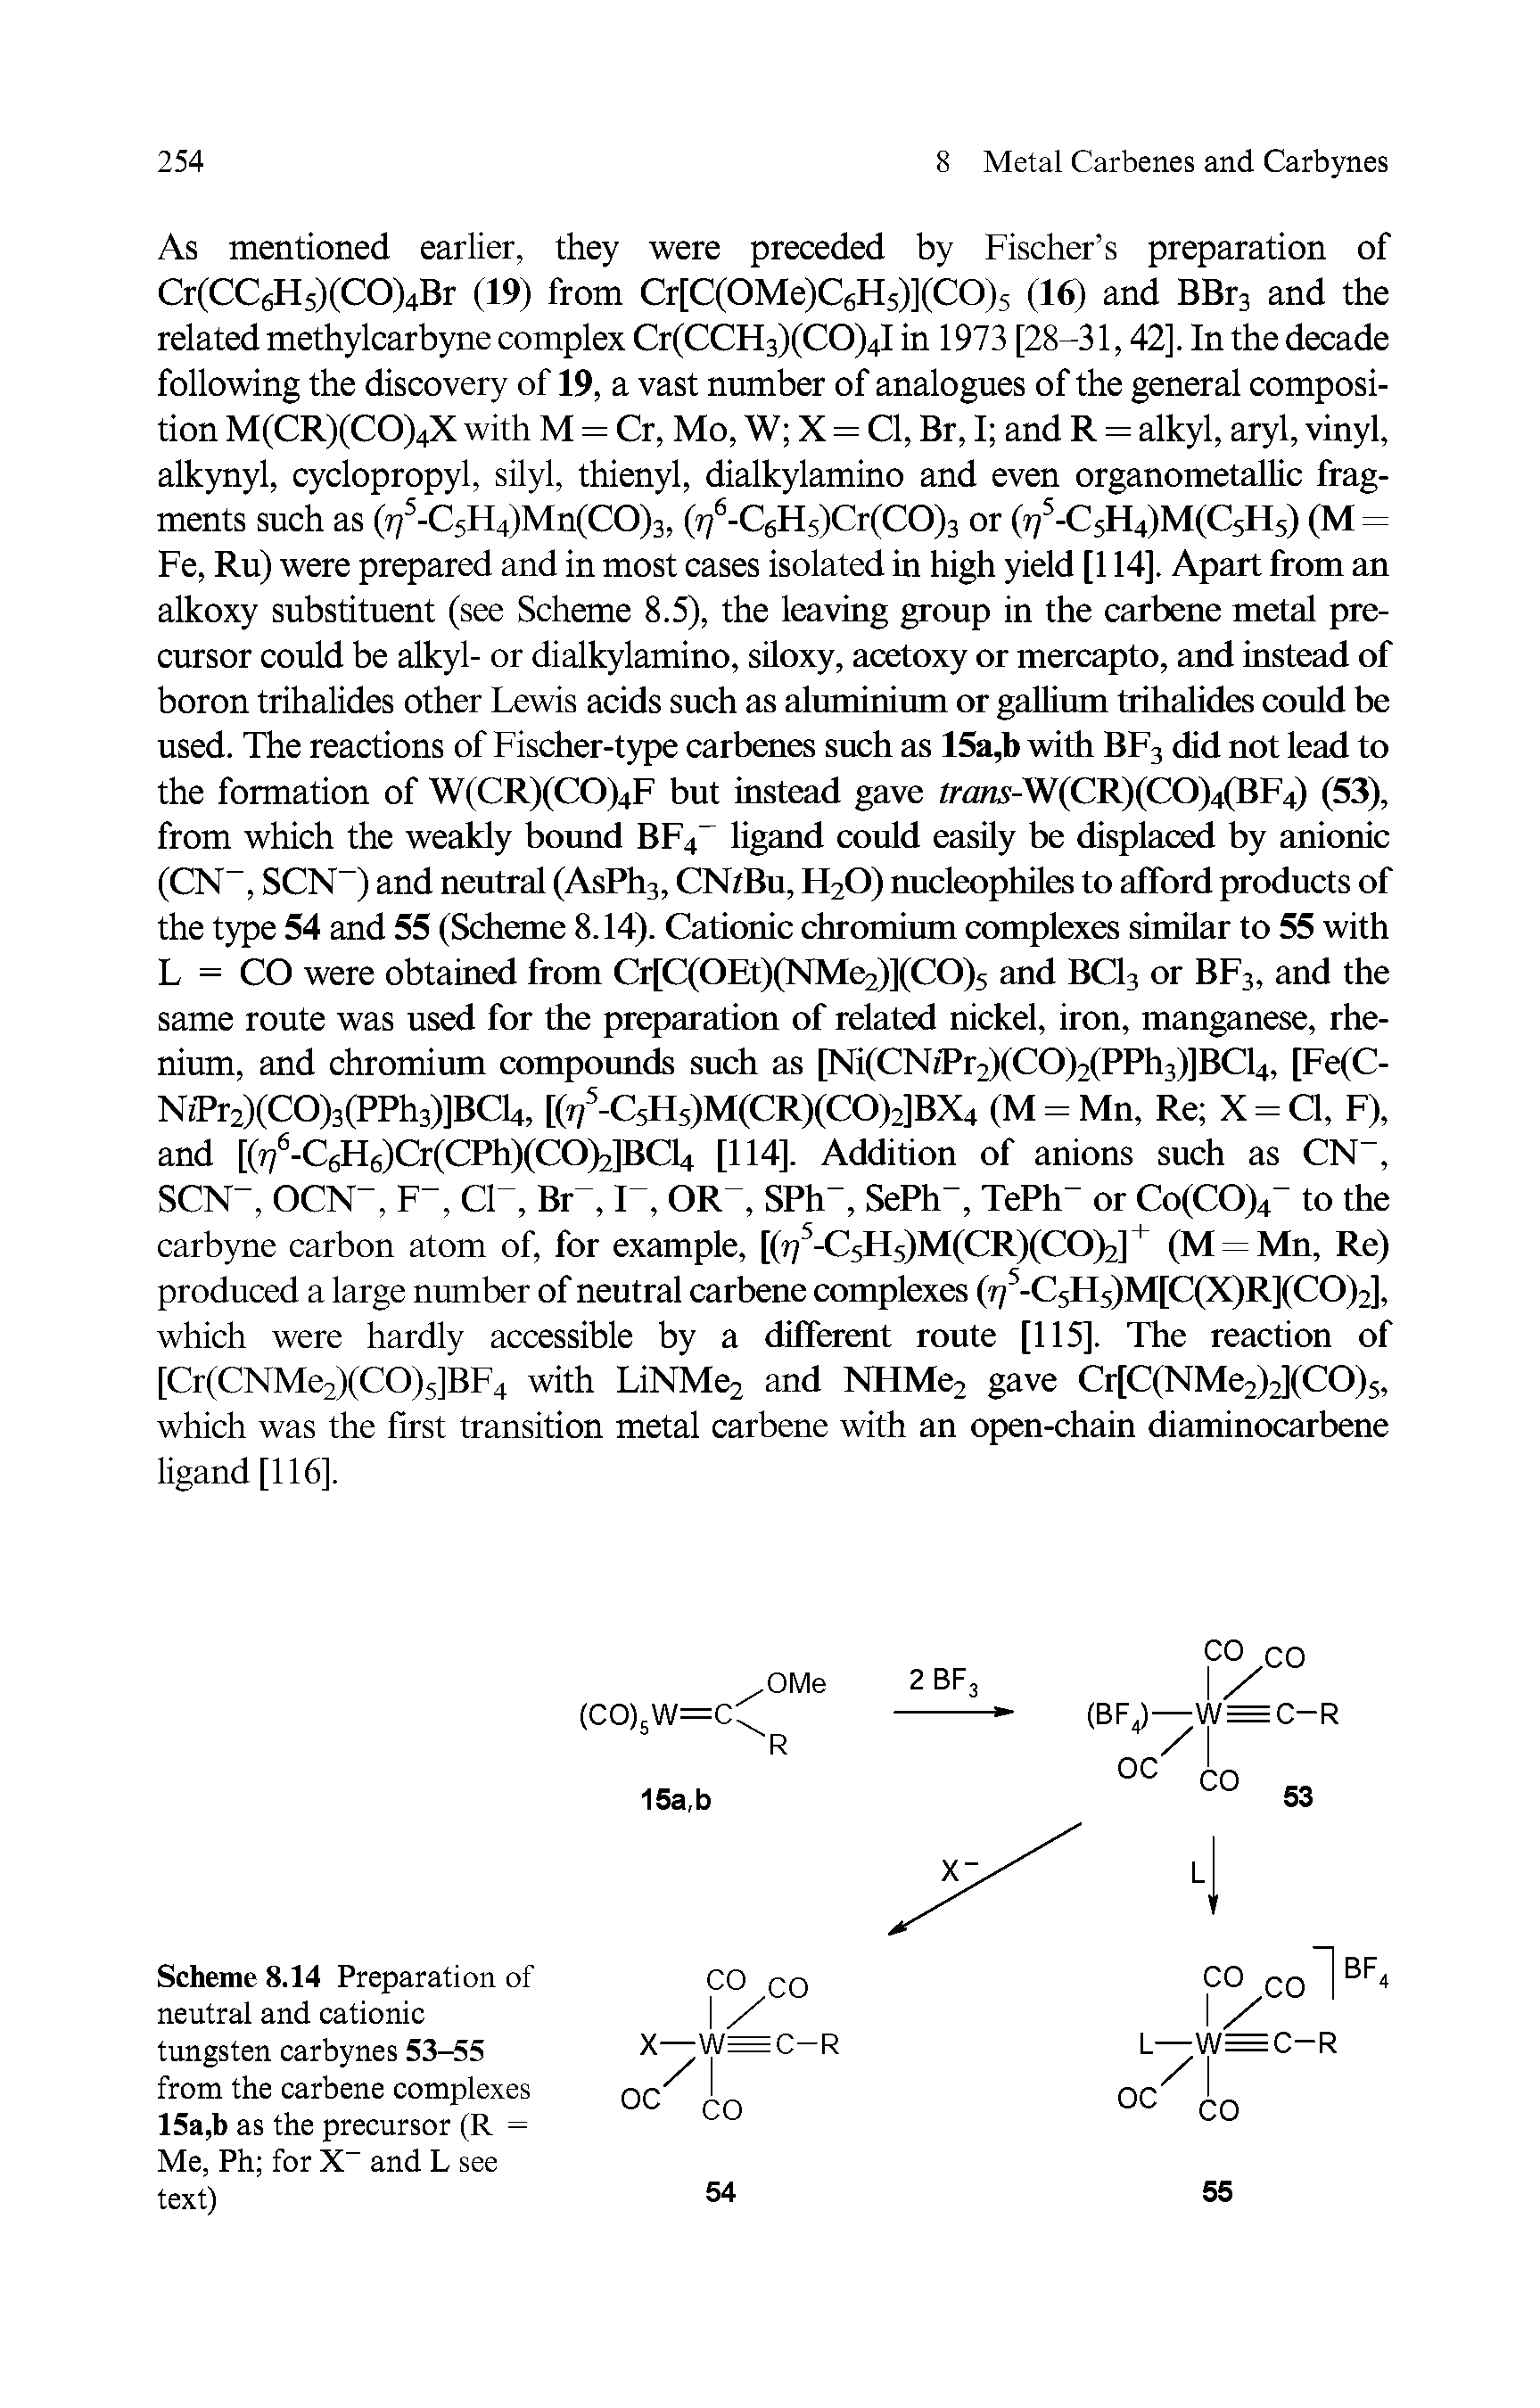 Scheme 8.14 Preparation of neutral and cationic tungsten carbynes 53-55 from the carbene complexes 15a,b as the precursor (R = Me, Ph for X- and L see text)...